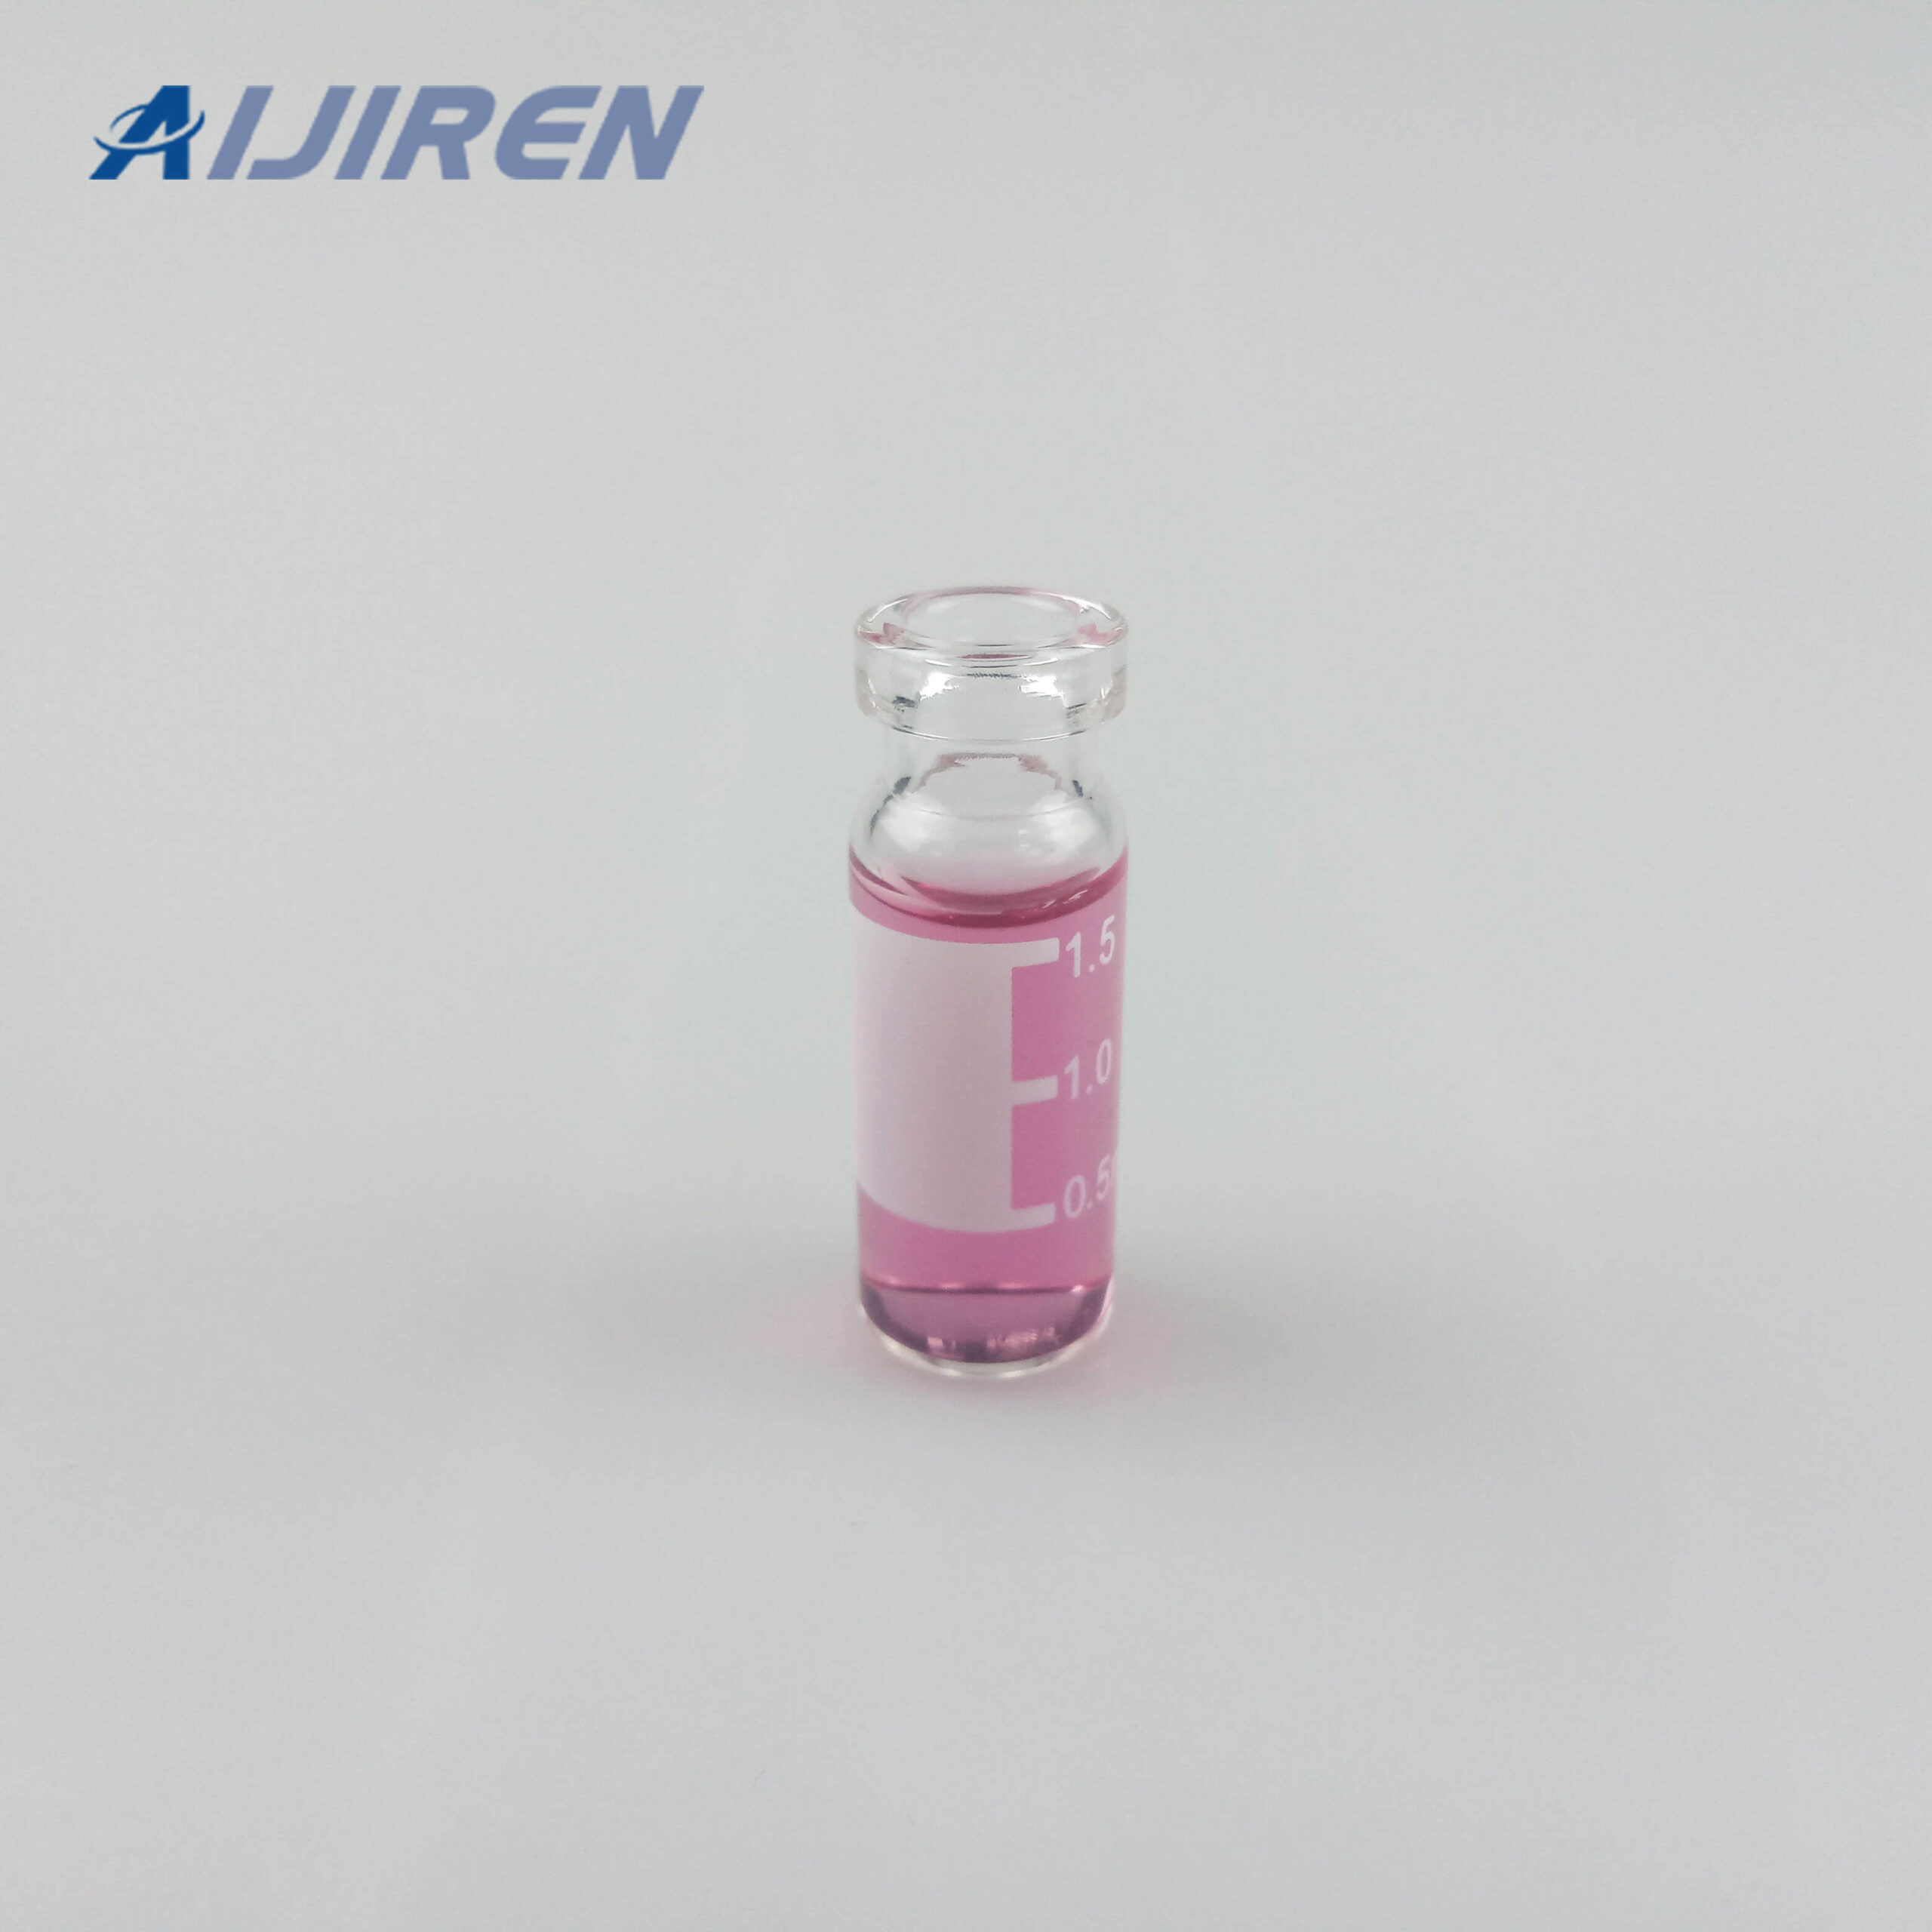 2ml Crimp Top Glass Vial with Label Area